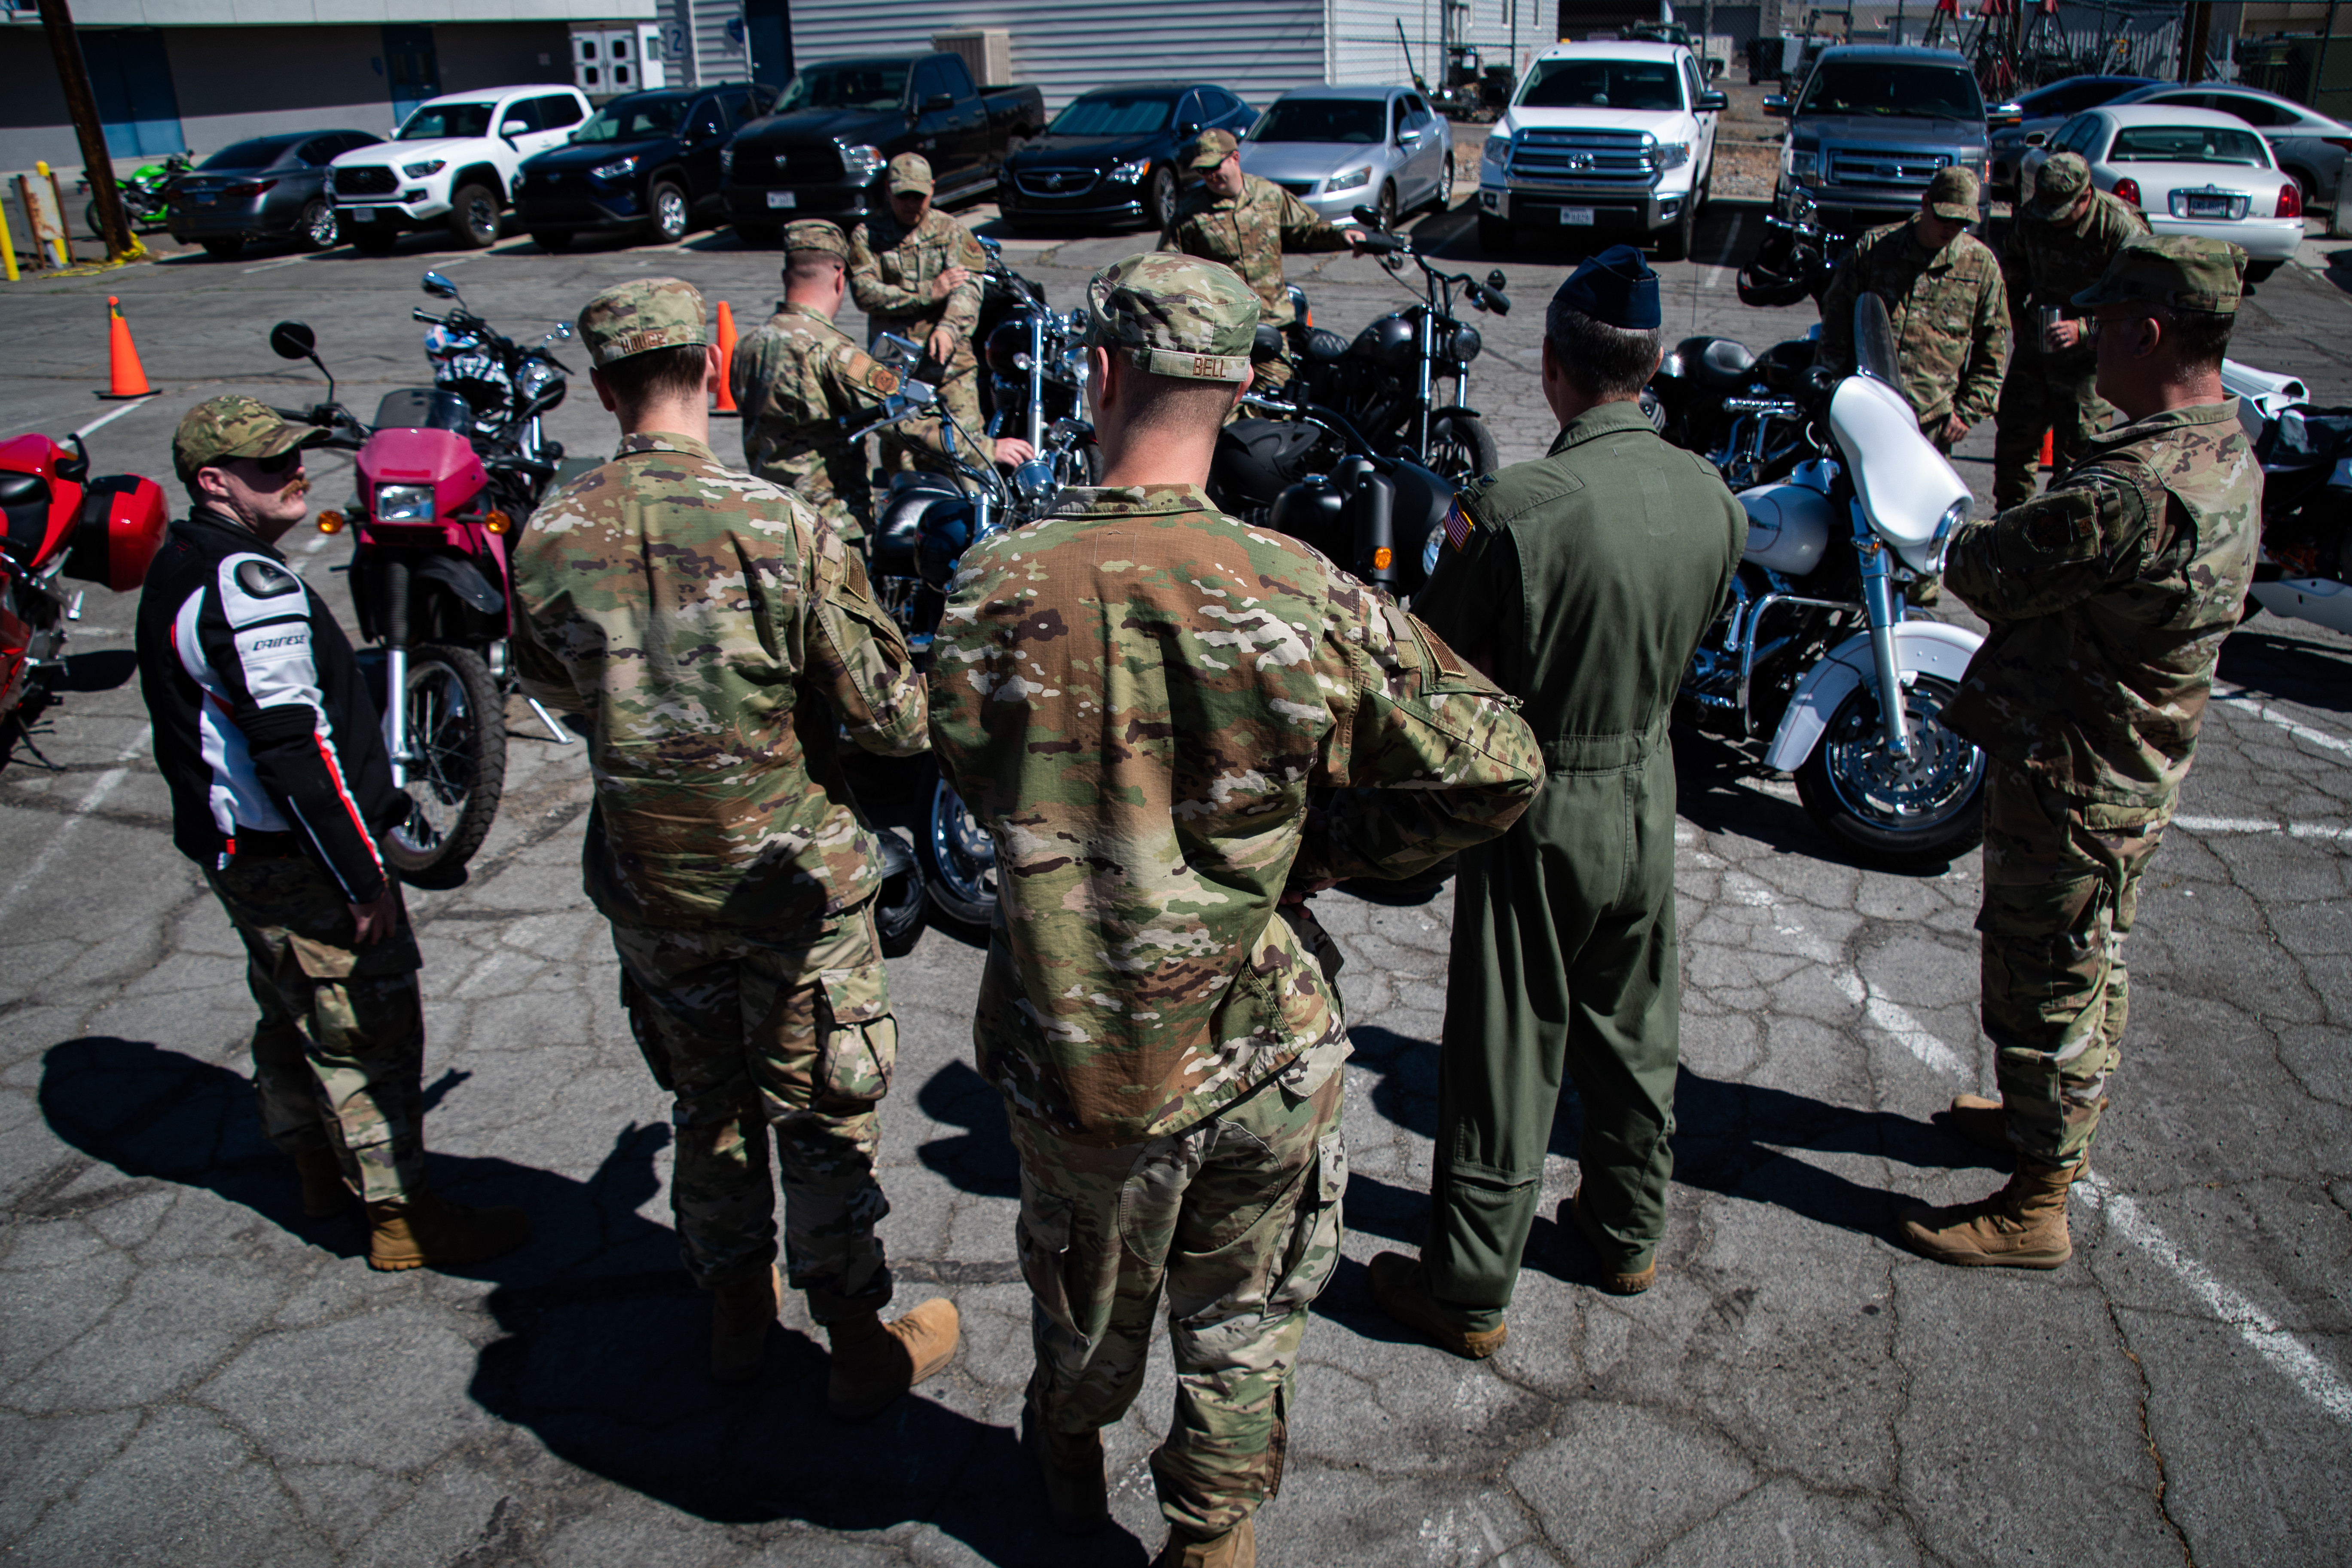 Motorcyclists from the 152nd Airlift Wing gather at the Nevada Air National Guard Base, Reno, Nevada, for an annual motorcycle mentorship training, June 24, 2022.